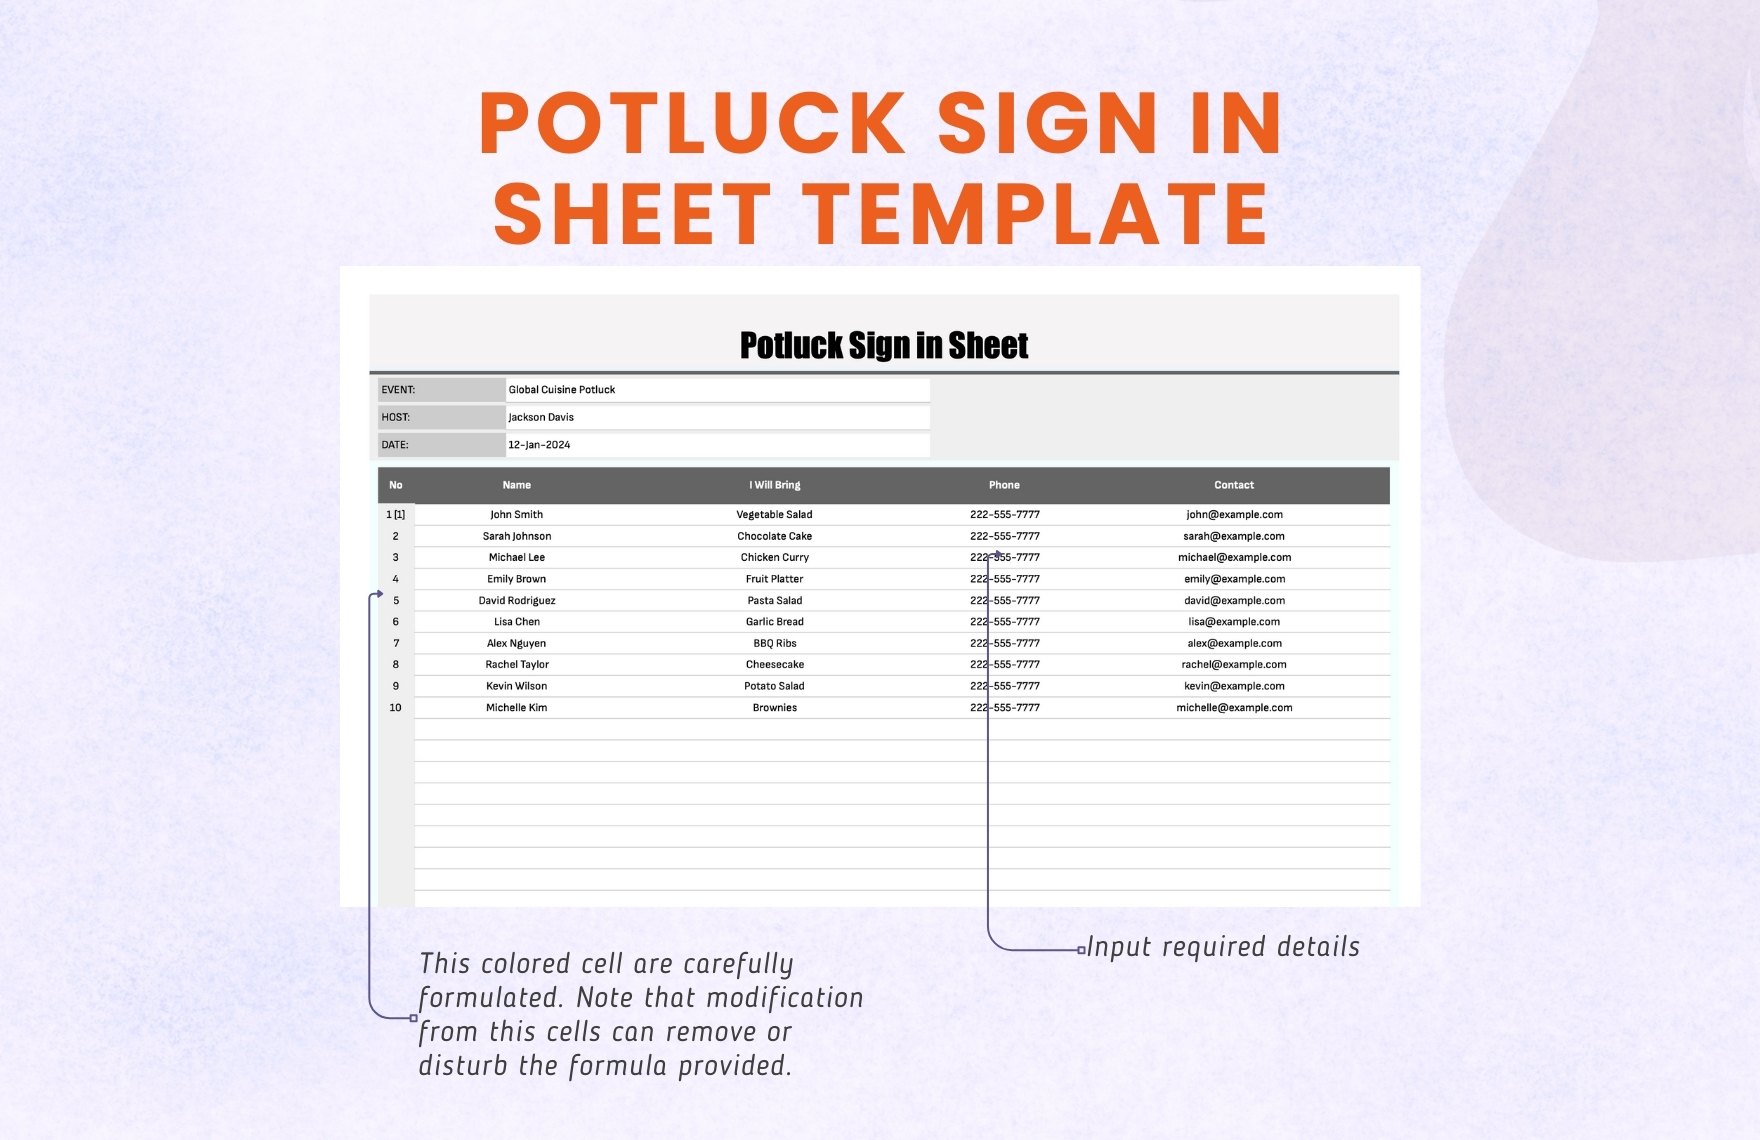 Potluck Sign in Sheet Template